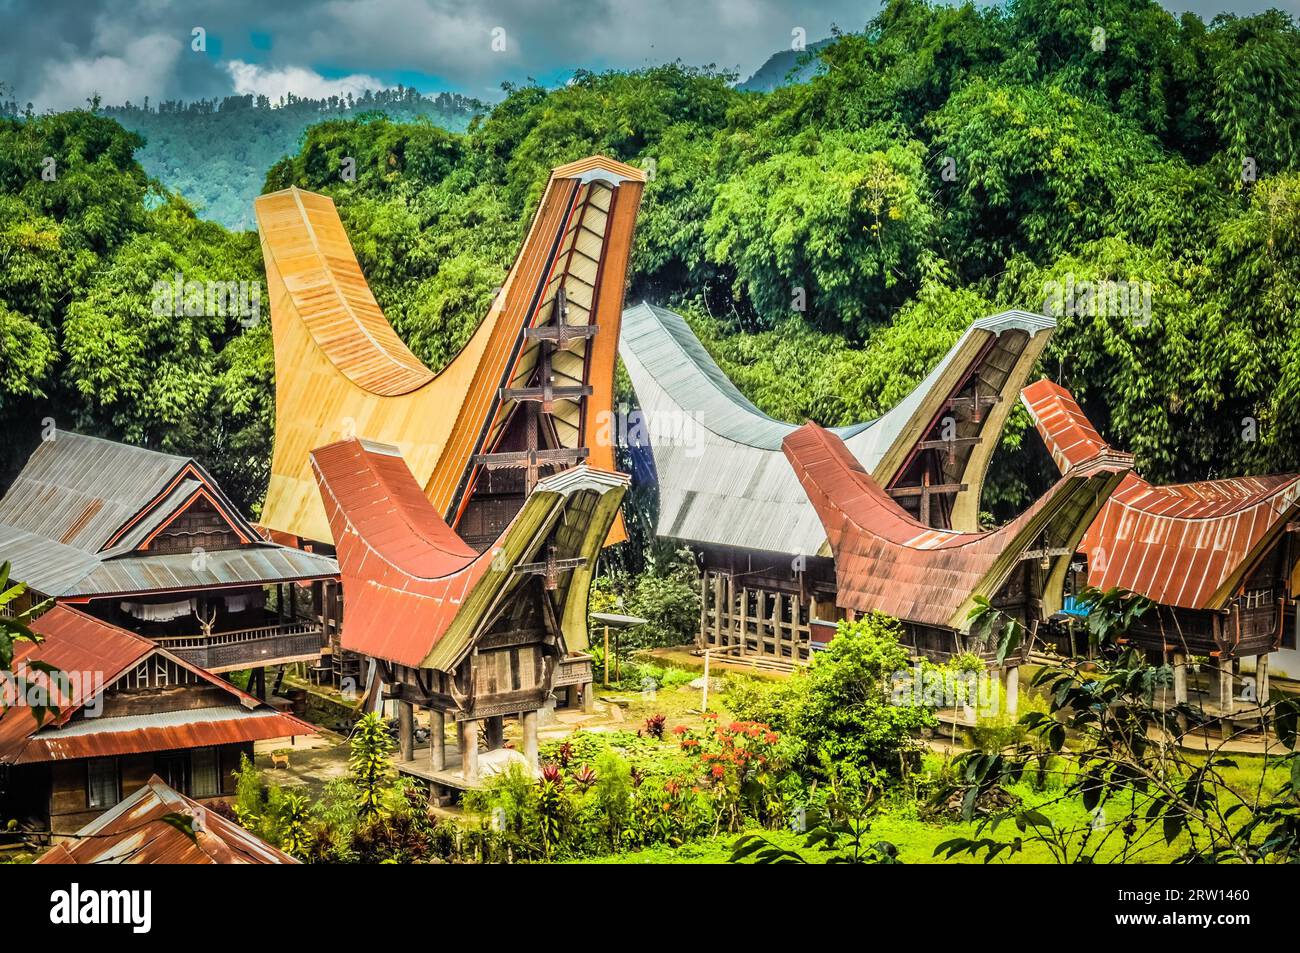 Photo of traditional ancestral houses, tongkonans, with large boat-shaped and saddleback roofs in Toraja region in Sulawesi, Indonesia Stock Photo